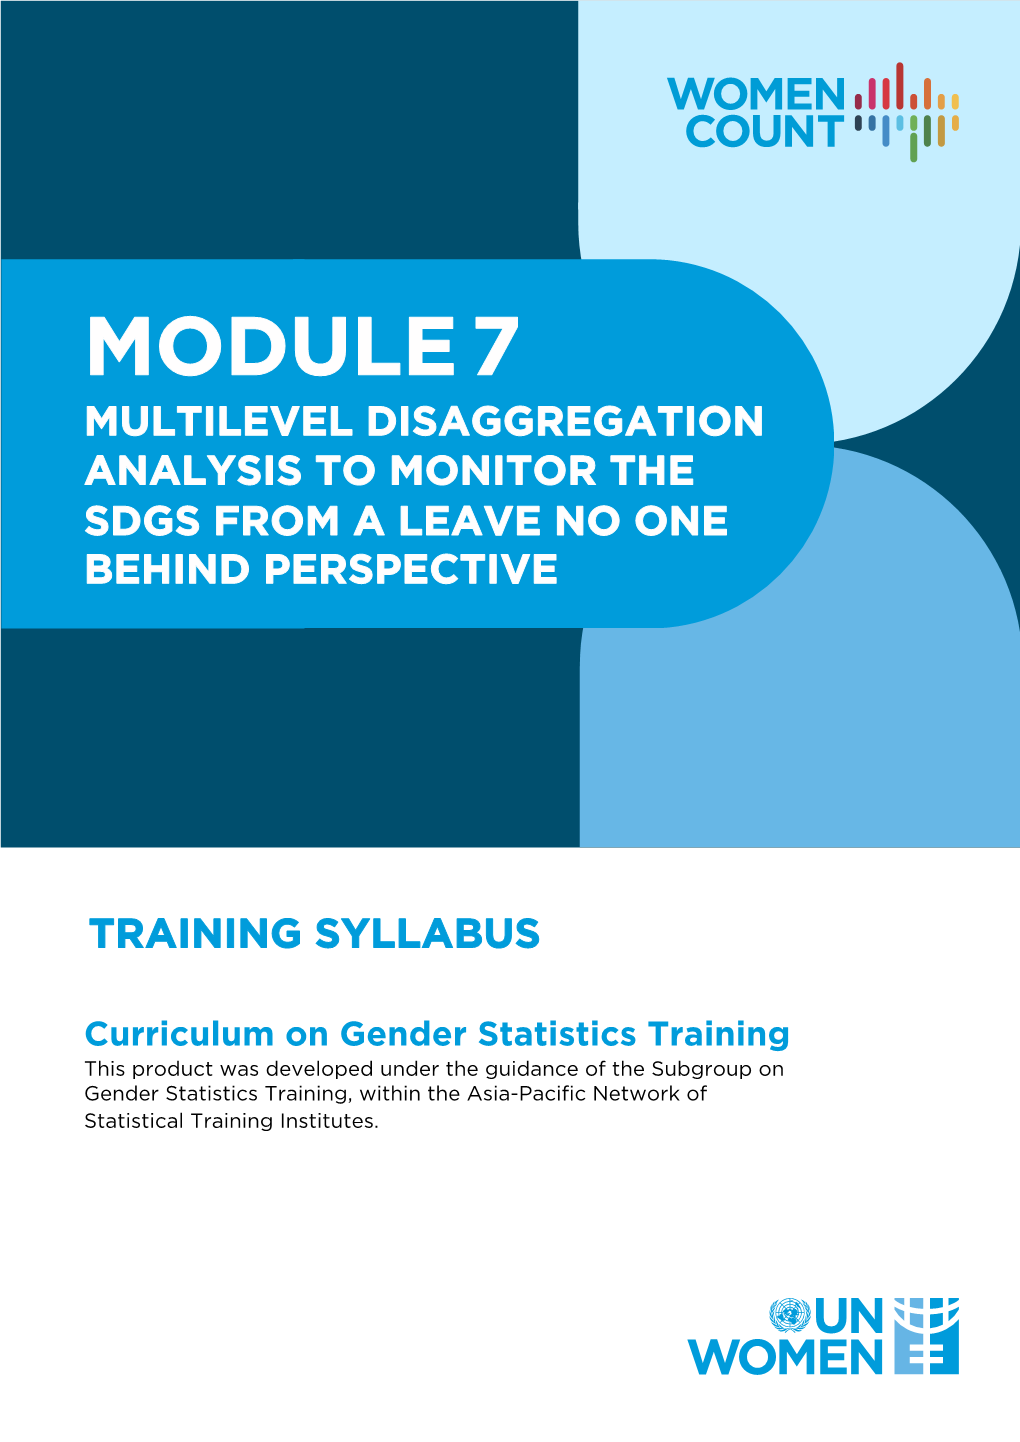 Module 7 Multilevel Disaggregation Analysis to Monitor the Sdgs from a Leave No One Behind Perspective